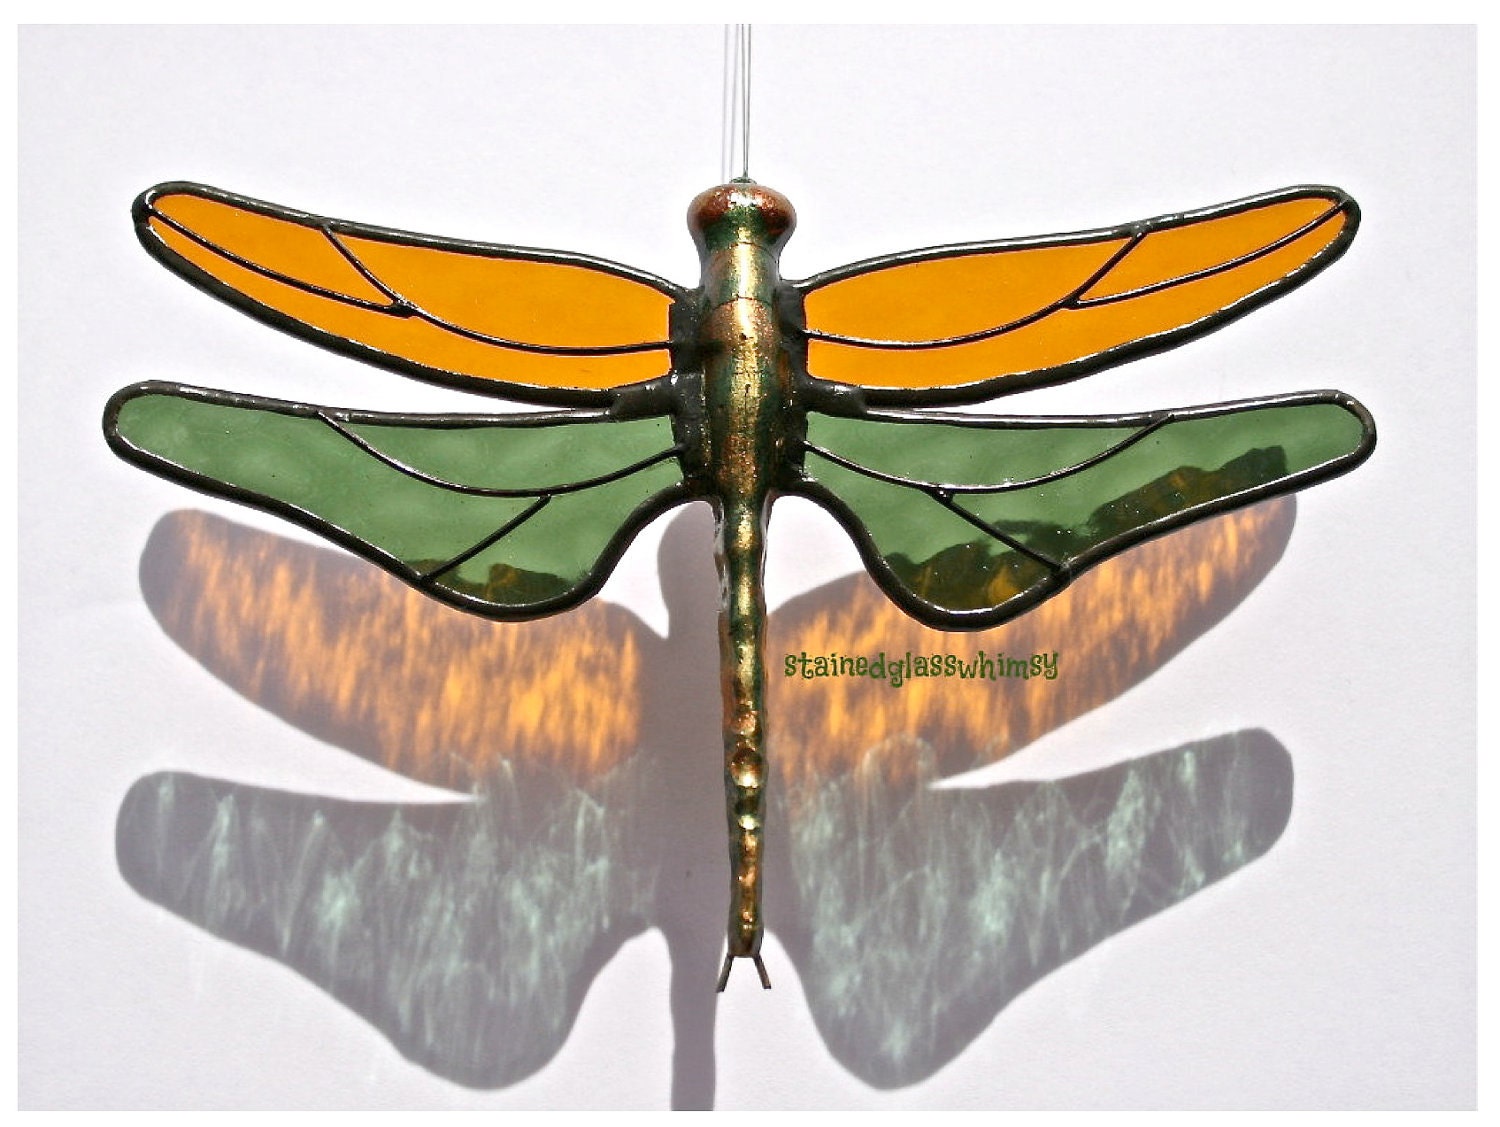 Stained Glass DRAGONFLY Suncatcher, Amber & Sage Green Textured Wings, Handcast Metal Body, USA Handmade - stainedglasswhimsy